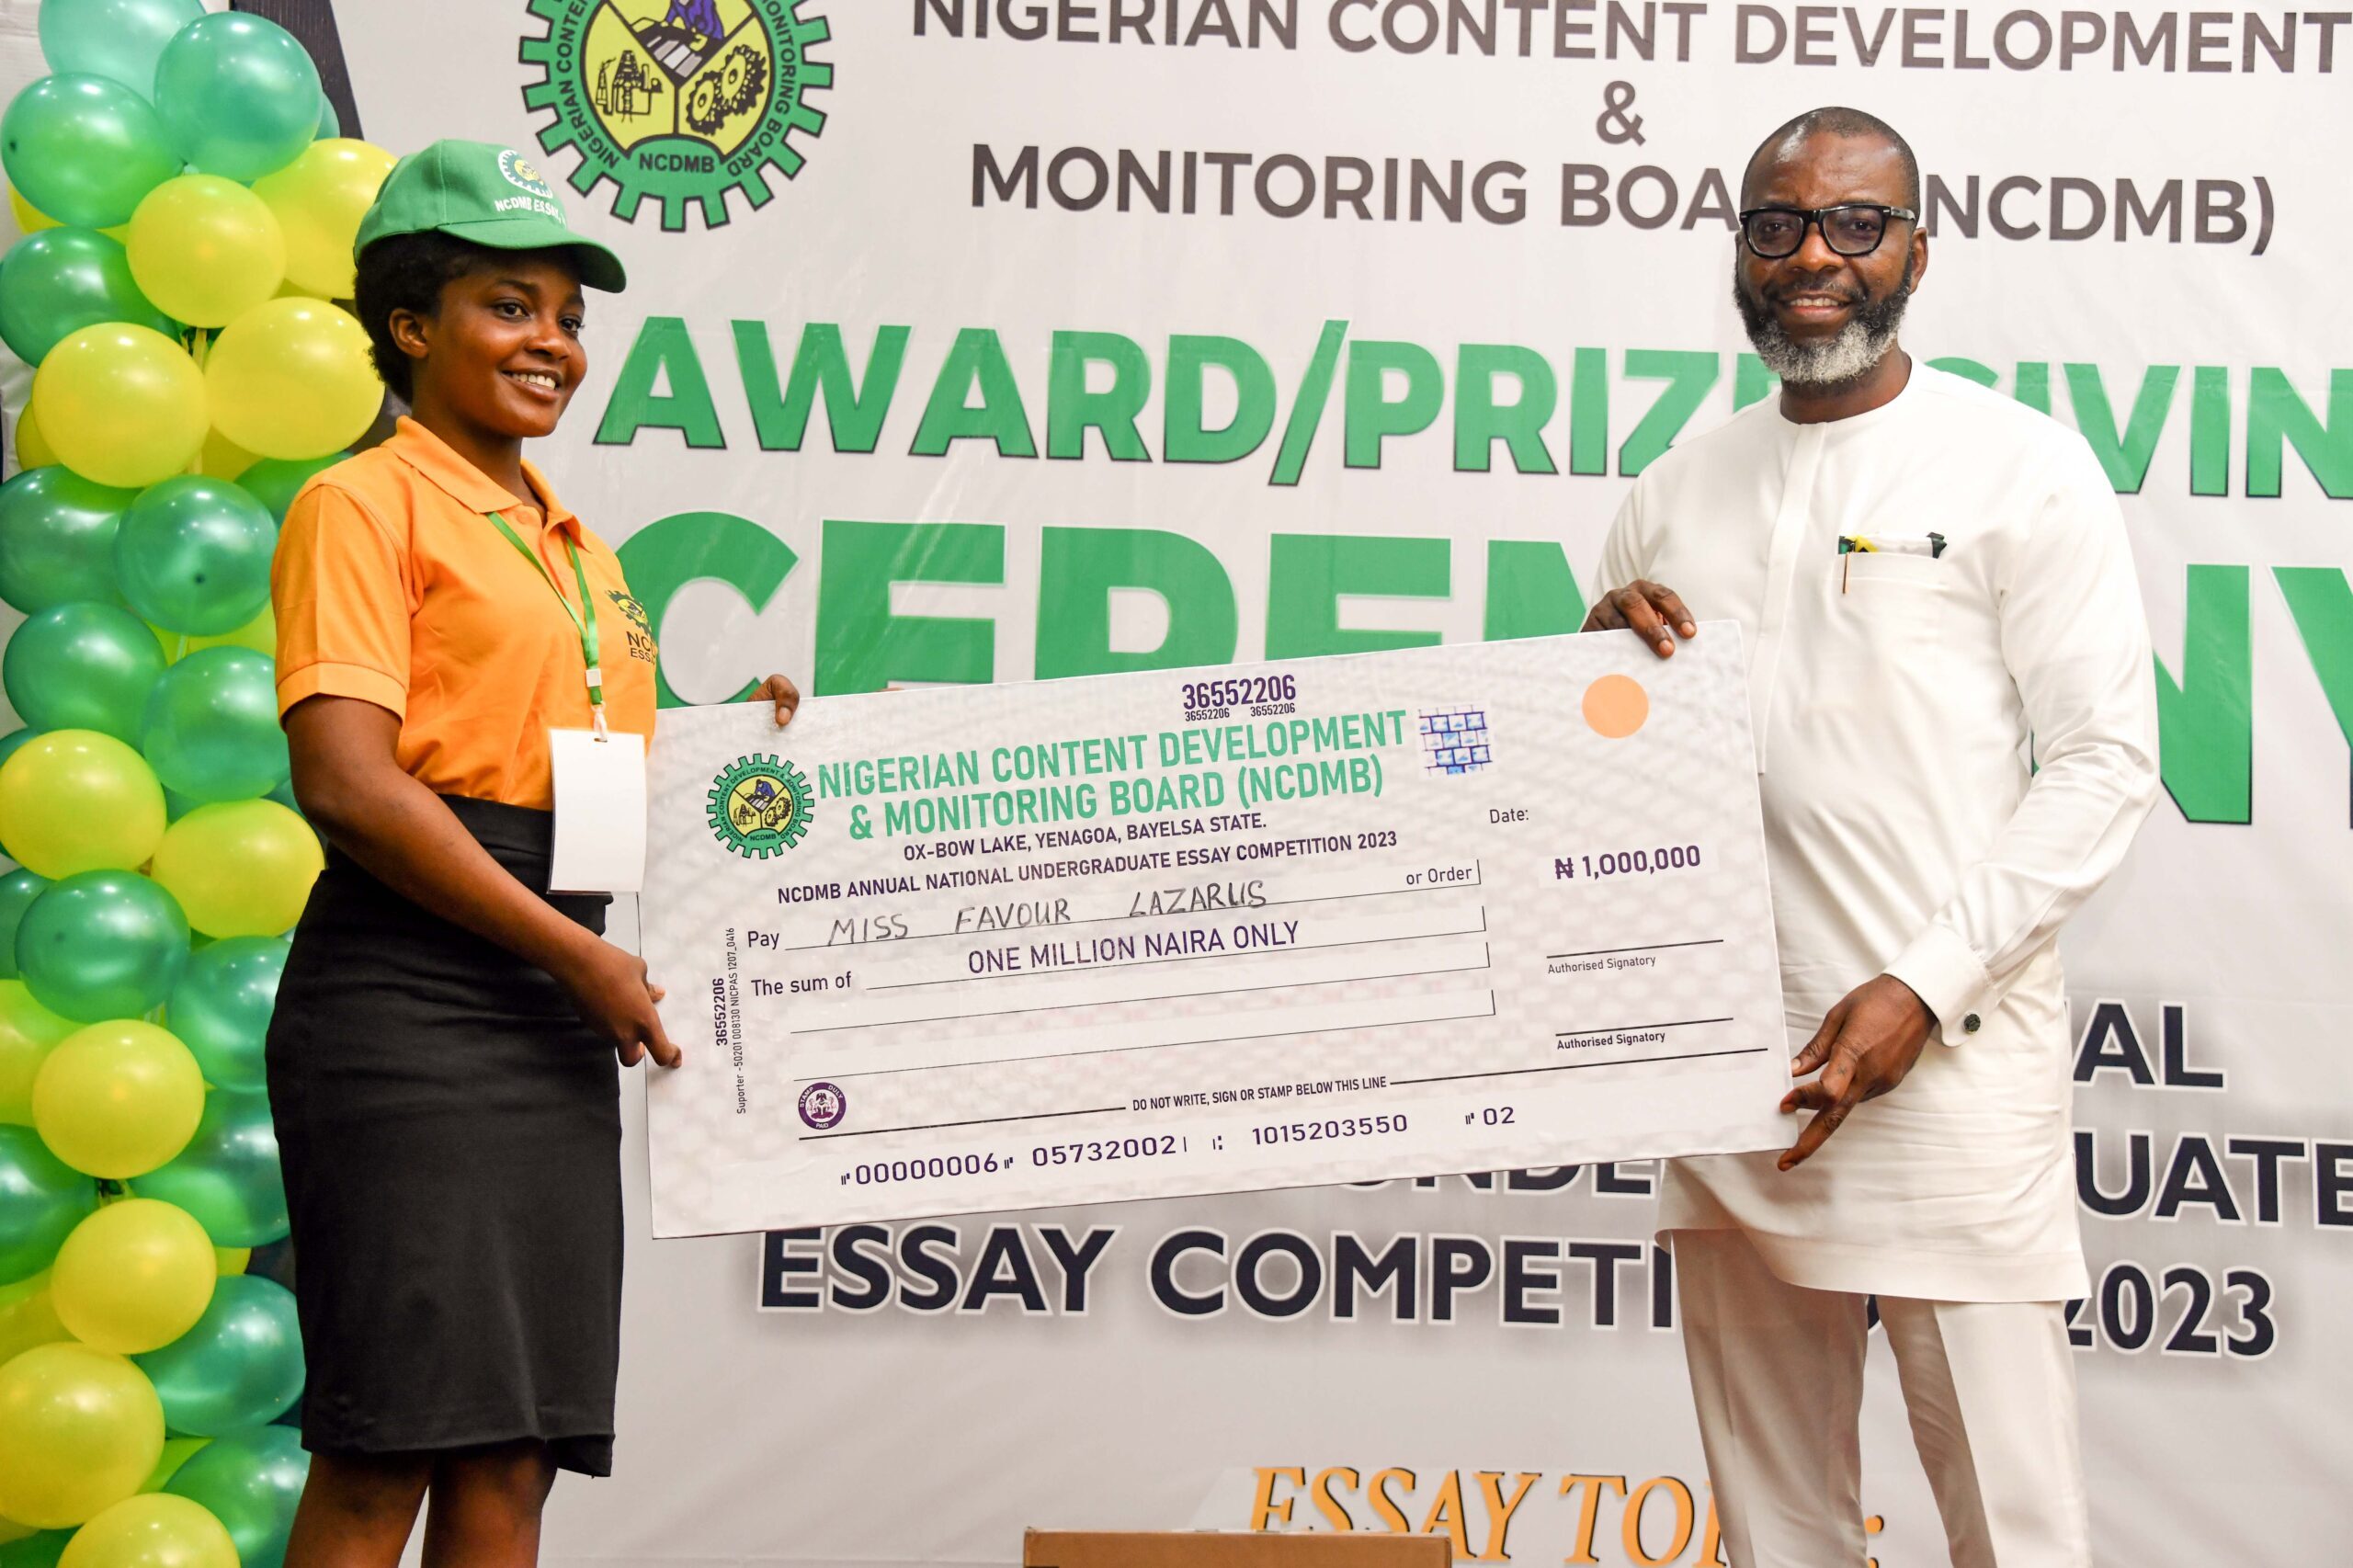 The annual essay competition is one of several initiatives of the NCDMB designed to benefit the youth segment of the Nigerian population.